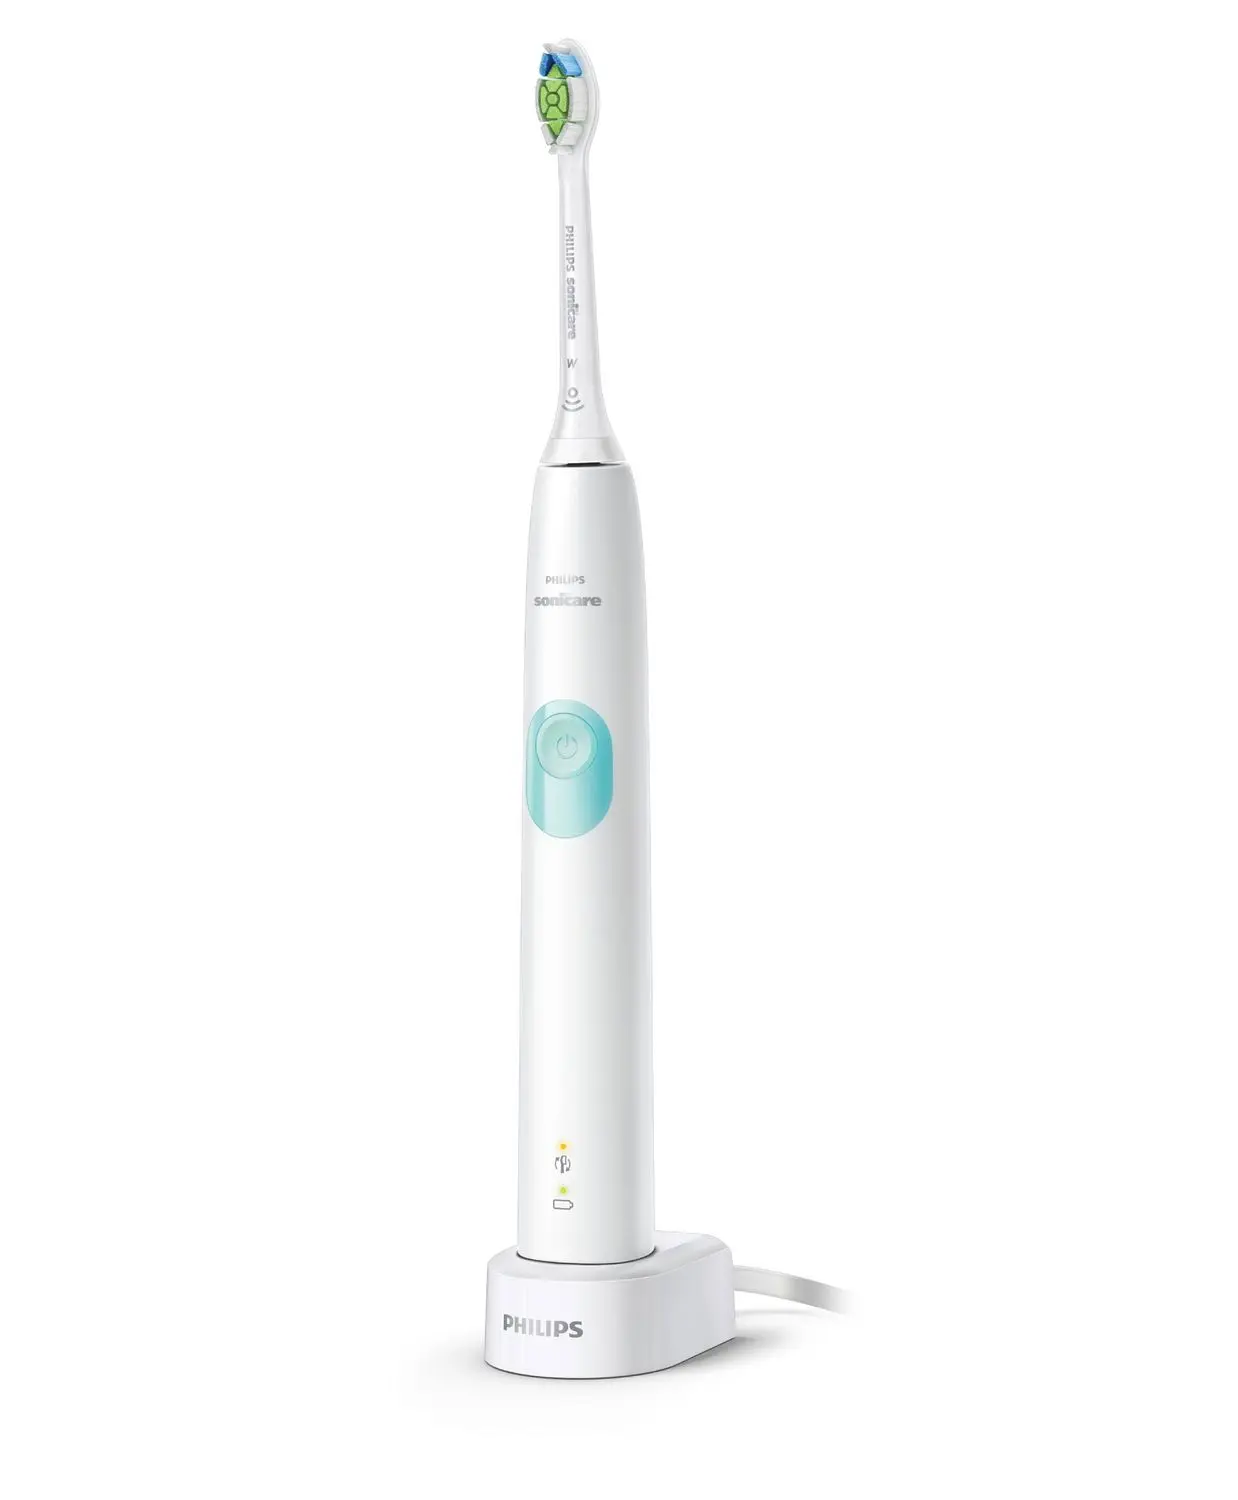 Philips Sonicare Protective Clean Sonic Electric Rechargeable Toothbrush, HX6807/24